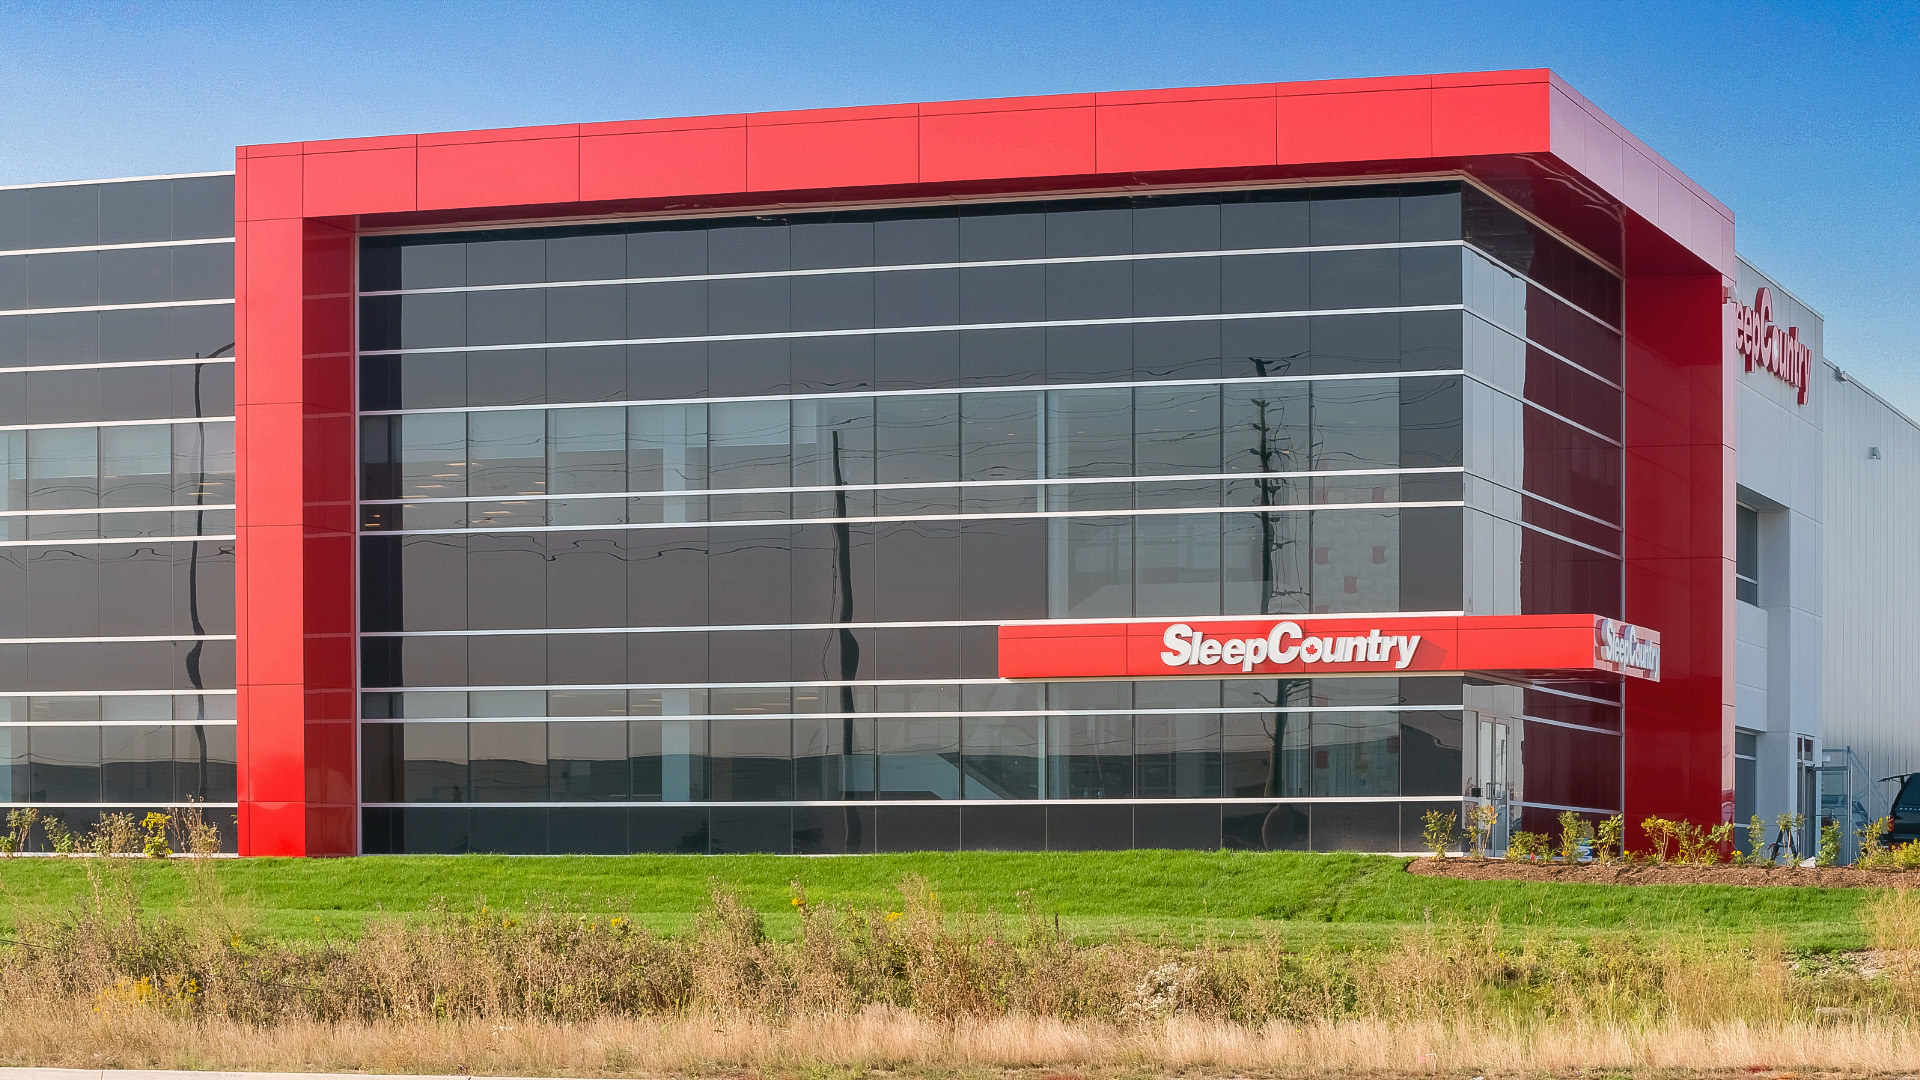 Sleep Country’s Decarbonization Journey: From 49 stores to a 214 portfolio-wide rollout